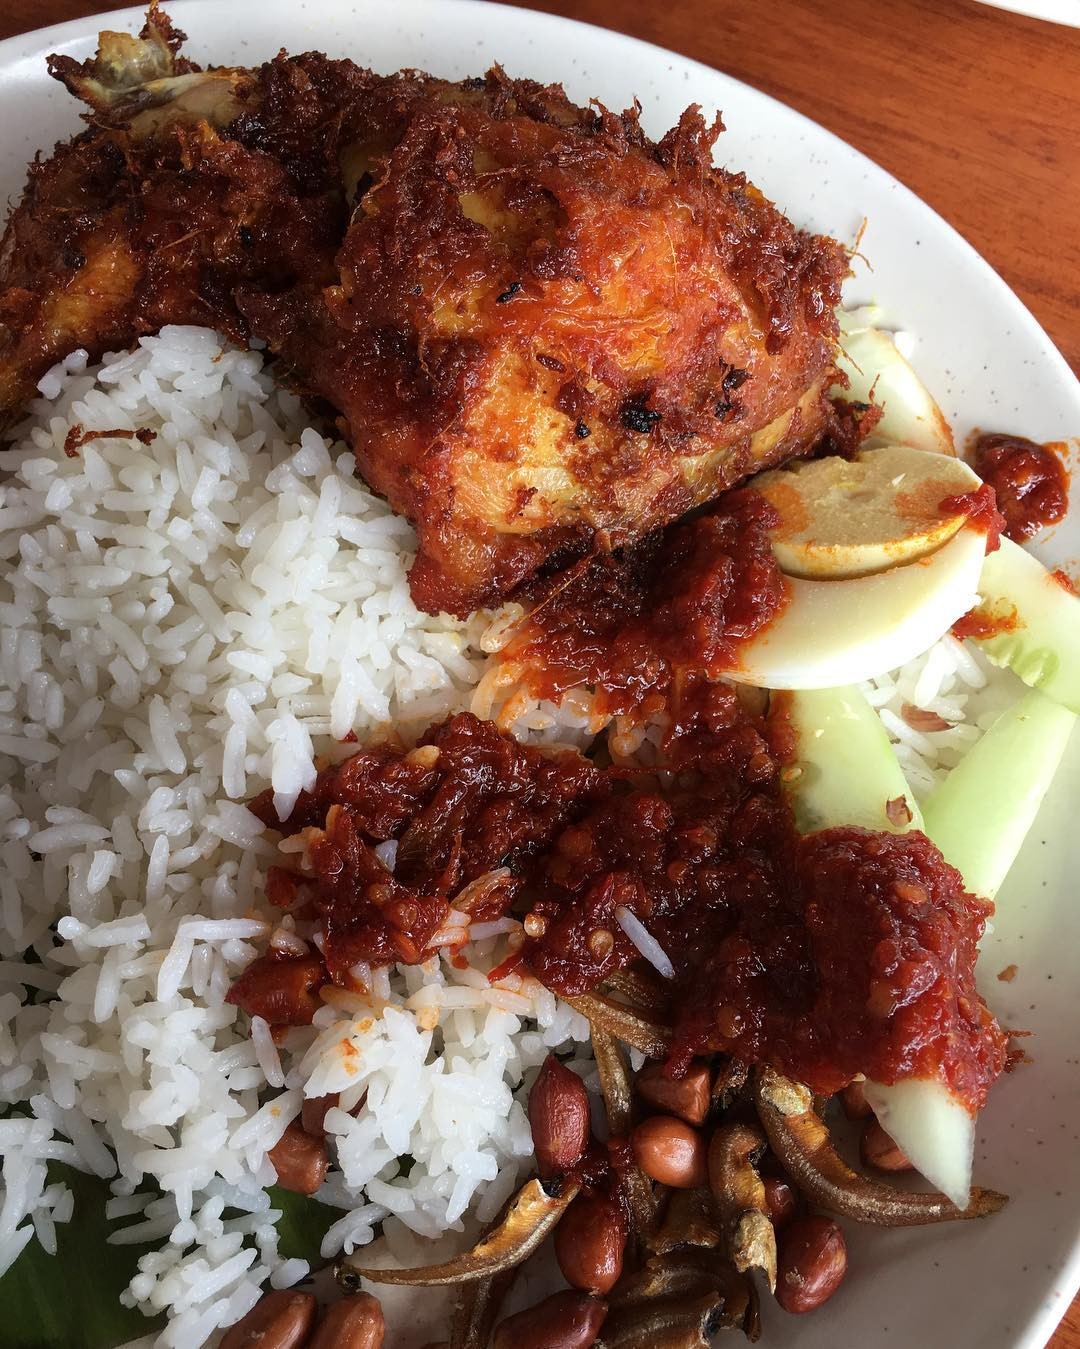 Food places under RM10 in Kuala Lumpur thesmartlocal